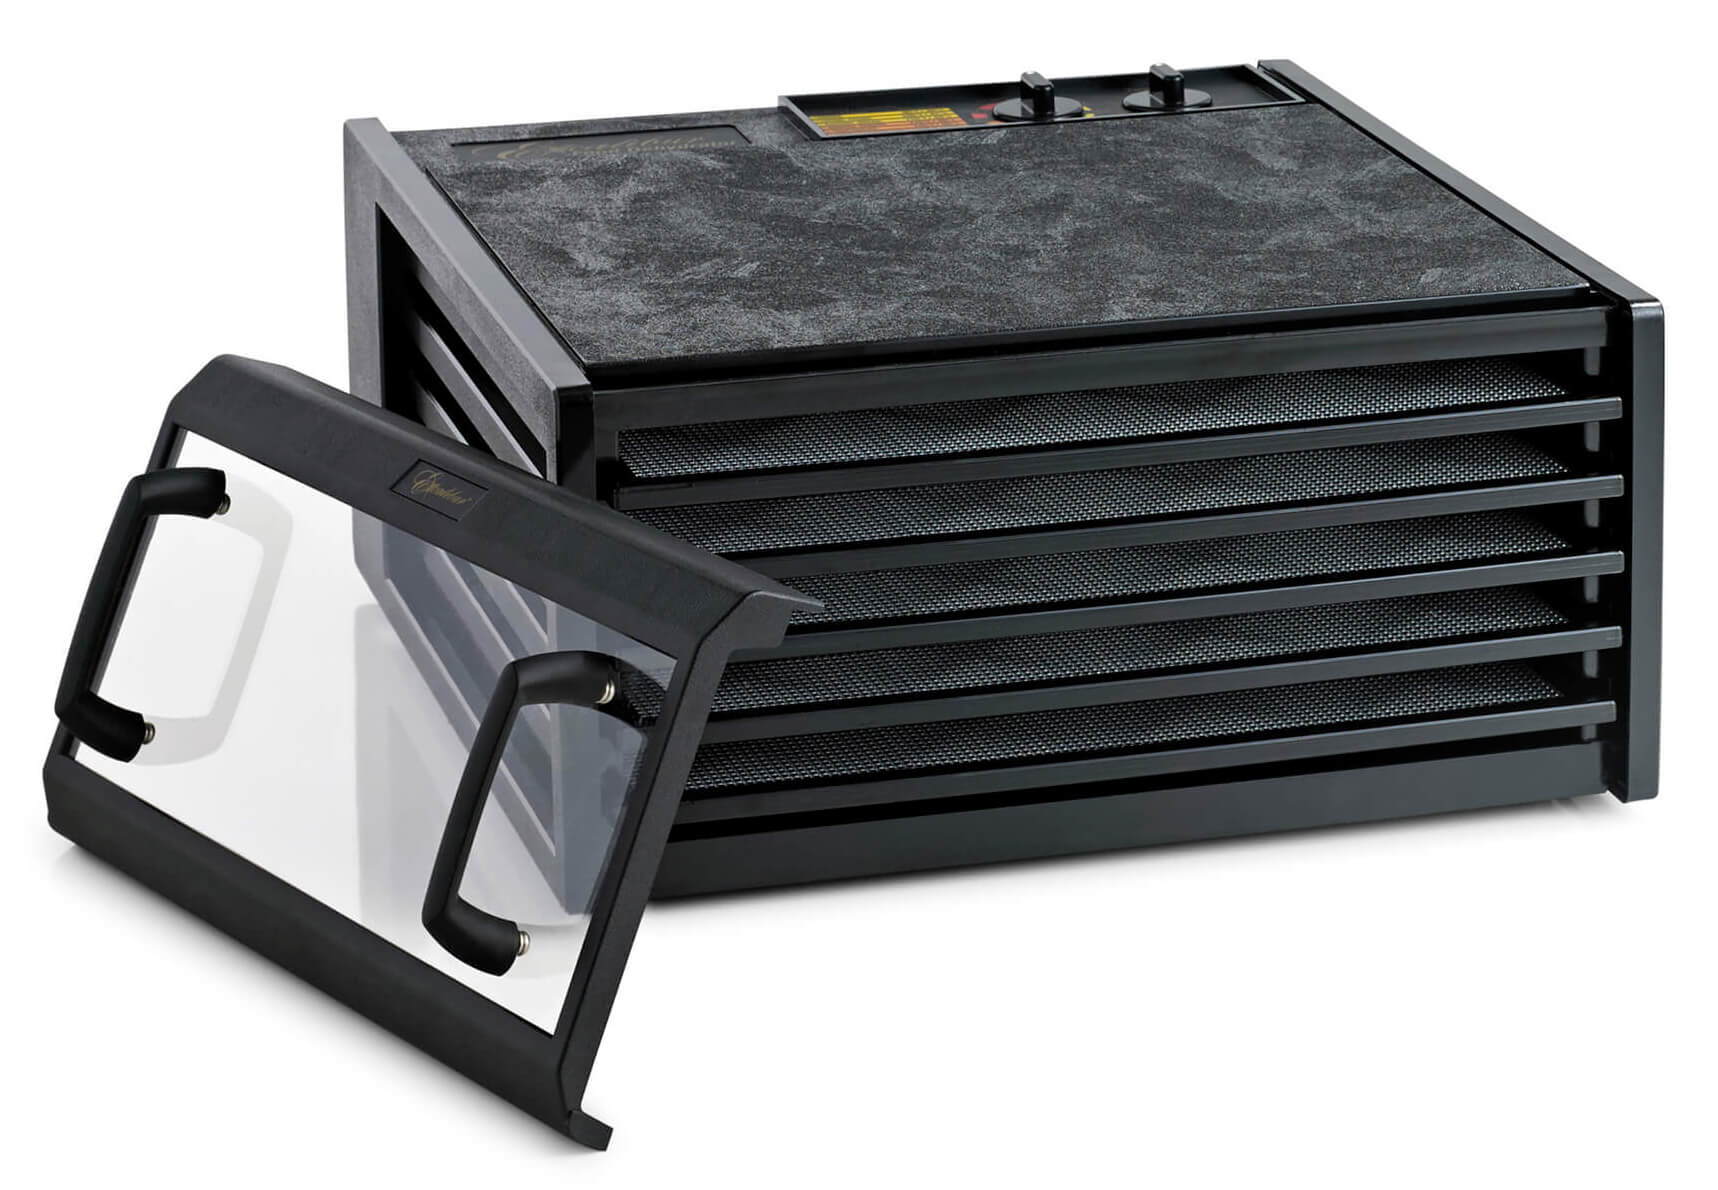 Excalibur 4526TCDB 5 tray dehydrator with clear door propped to the side.